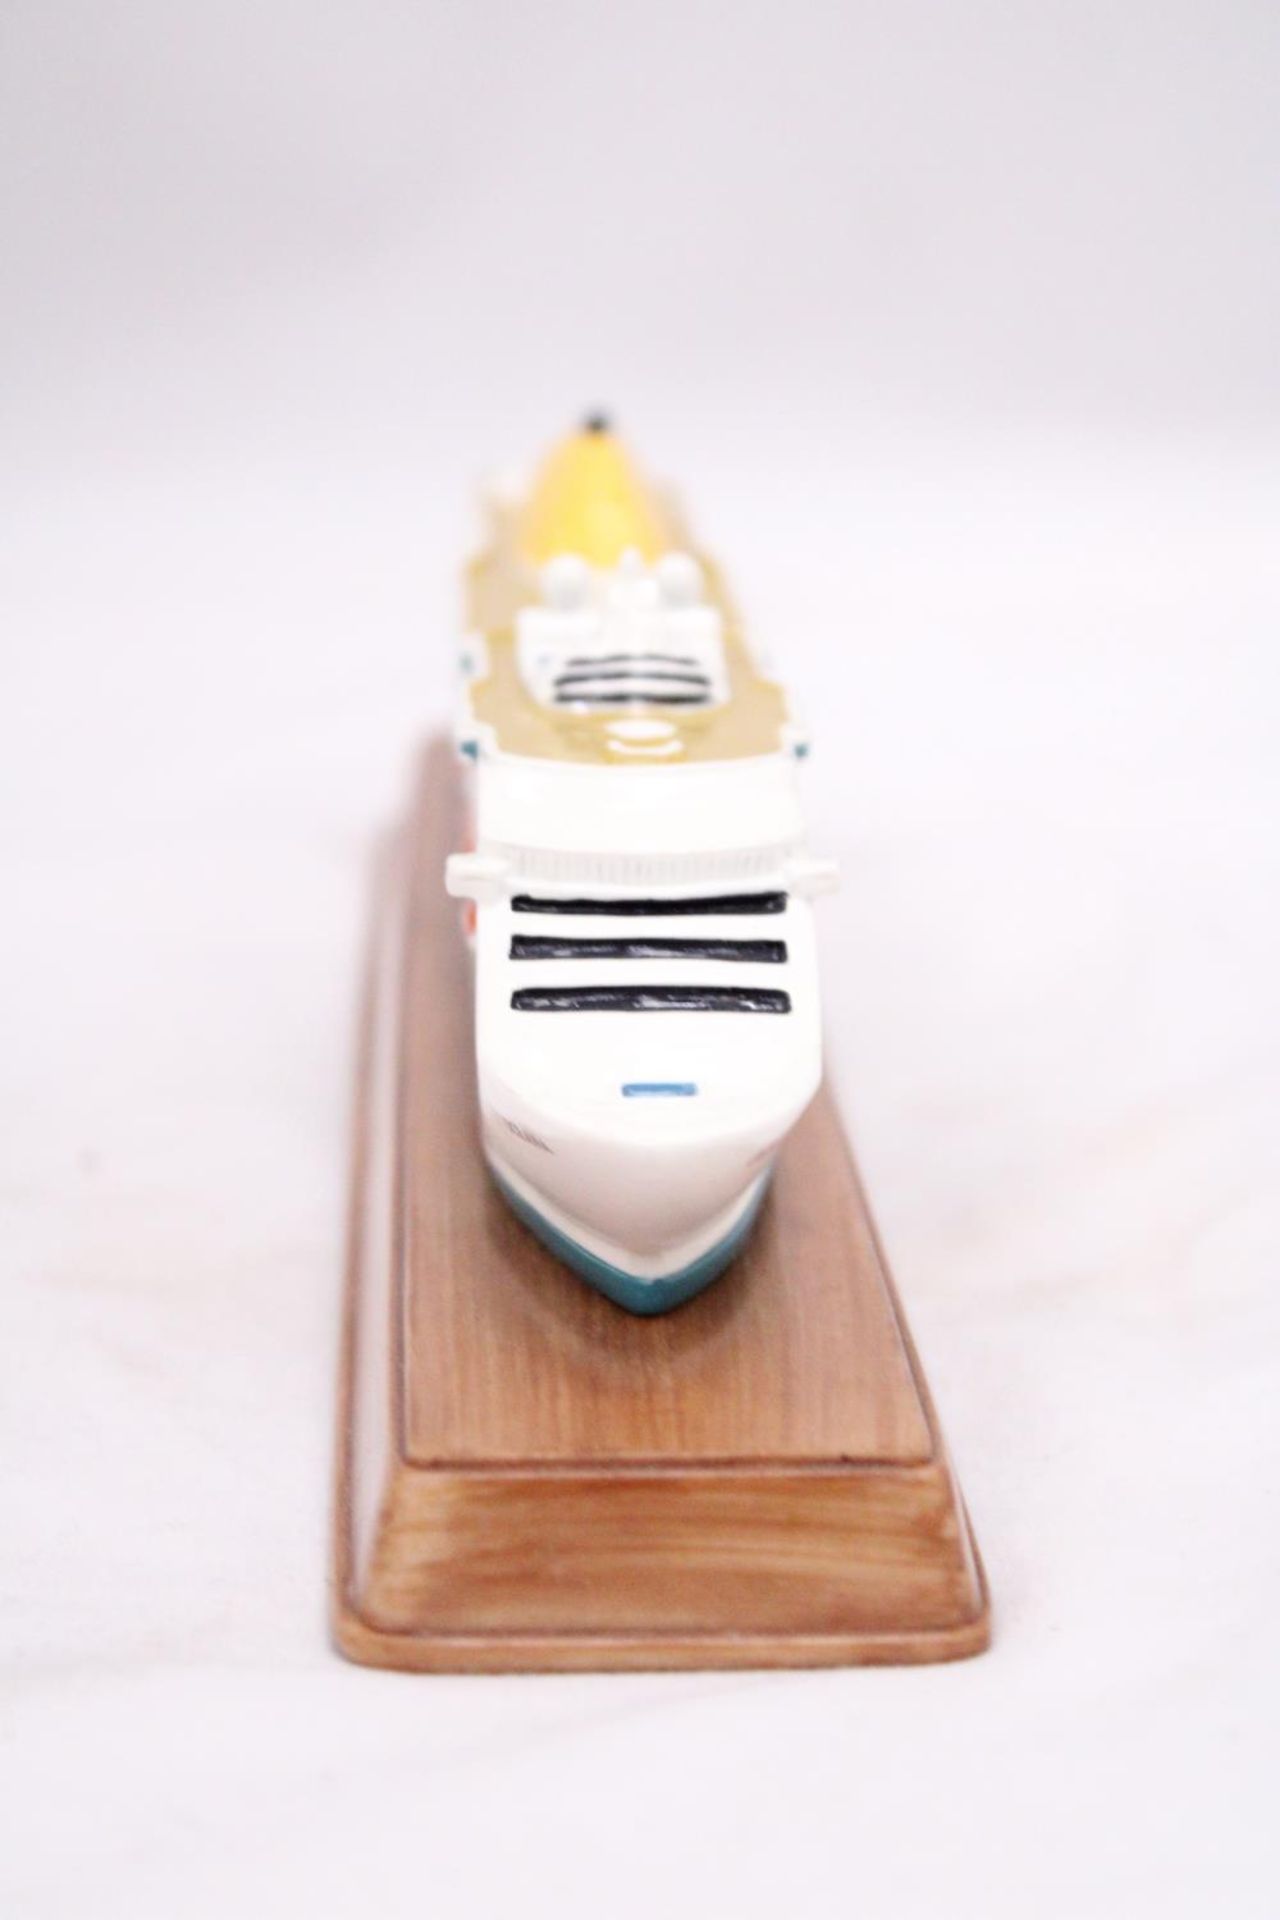 A HEAVY, SOLID, OCEAN LINER ON WOODEN STAND, 'OCEANA', LENGTH 27CM, HEIGHT 6CM - Image 3 of 5